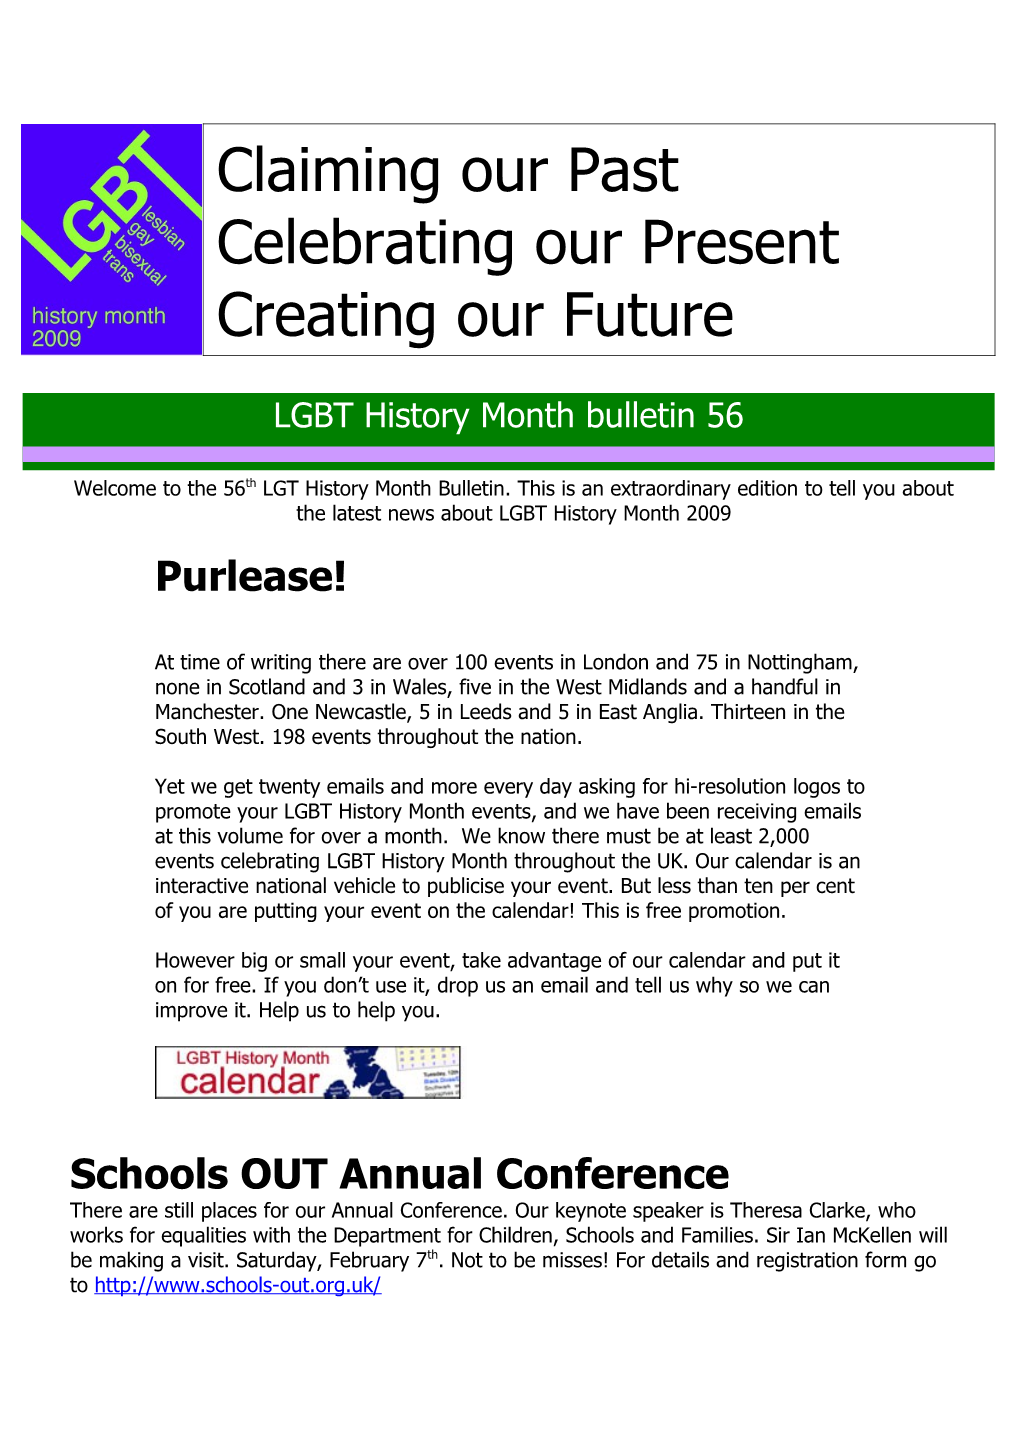 Schools out Annual Conference